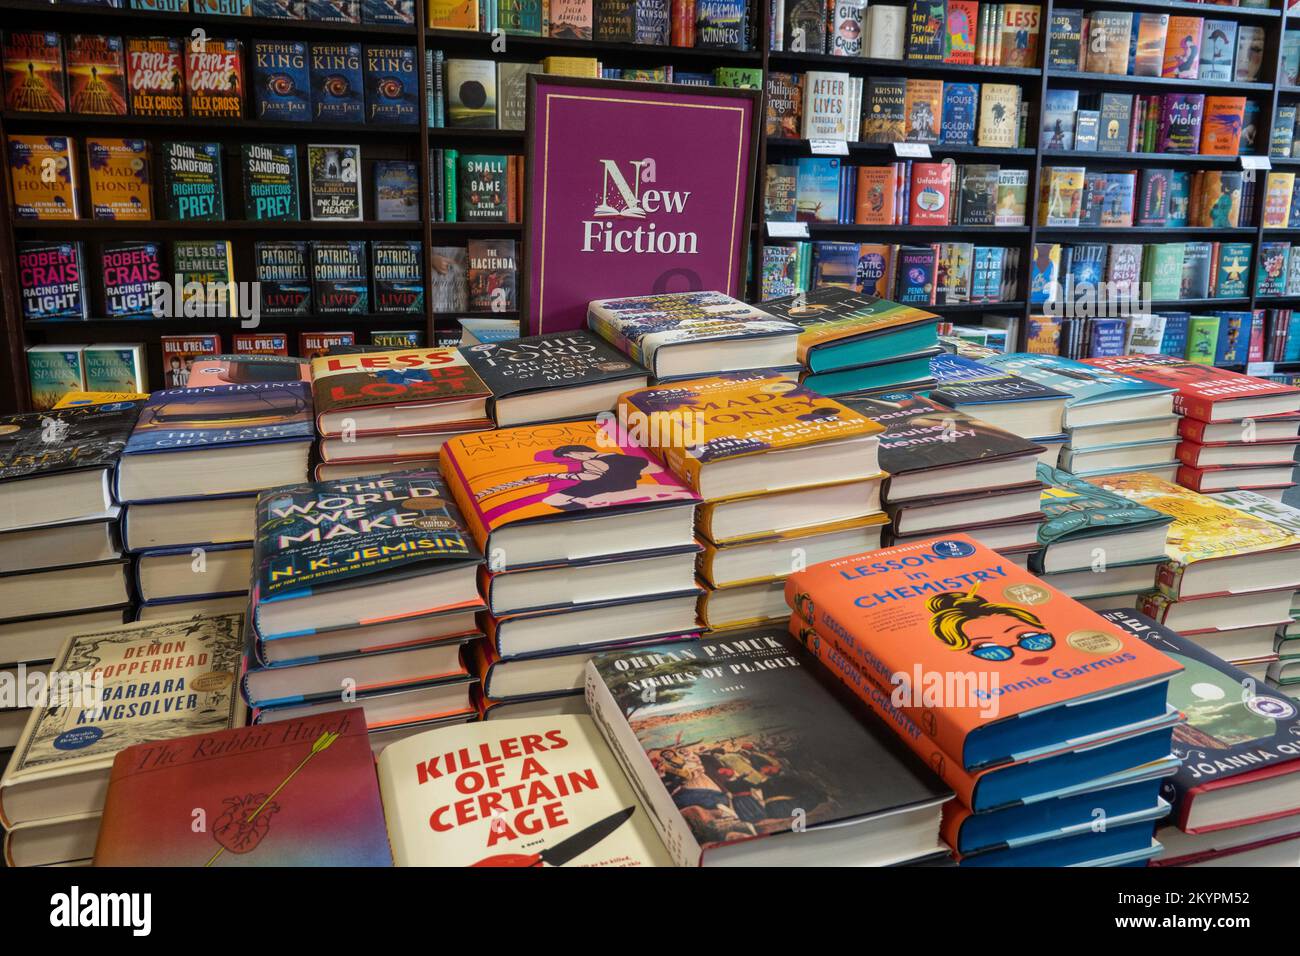 Barnes & Noble booksellers on Union Square has a large selection of merchandise, New York City, USA  2022 Stock Photo